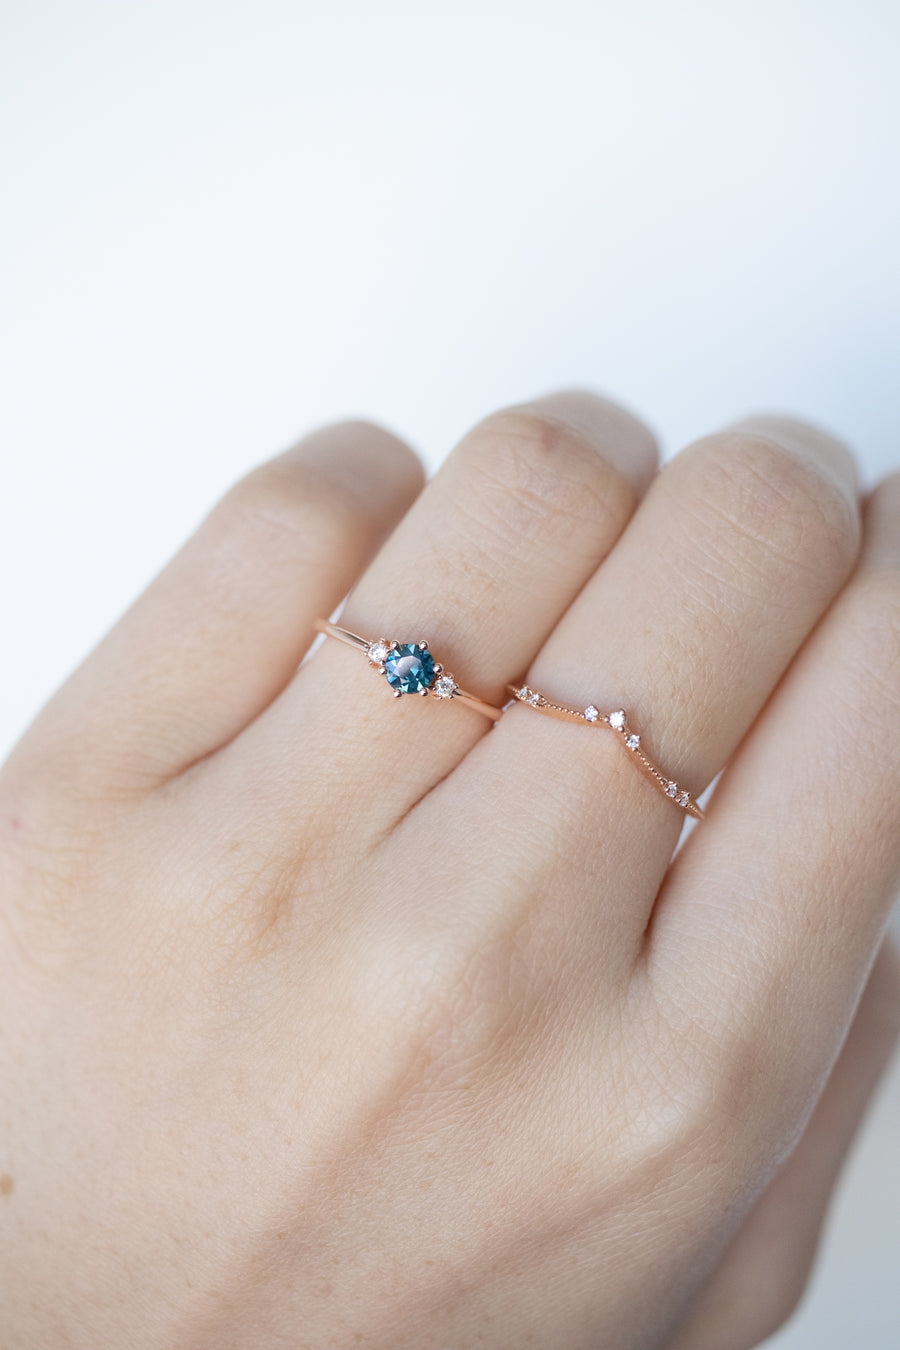 LIMITED DISCOUNT (3 SETS ONLY) ~0.30carat Natural Teal Sapphire & total 0.04carat Diamond 18K with total 0.04carat Diamond Stacking Ring